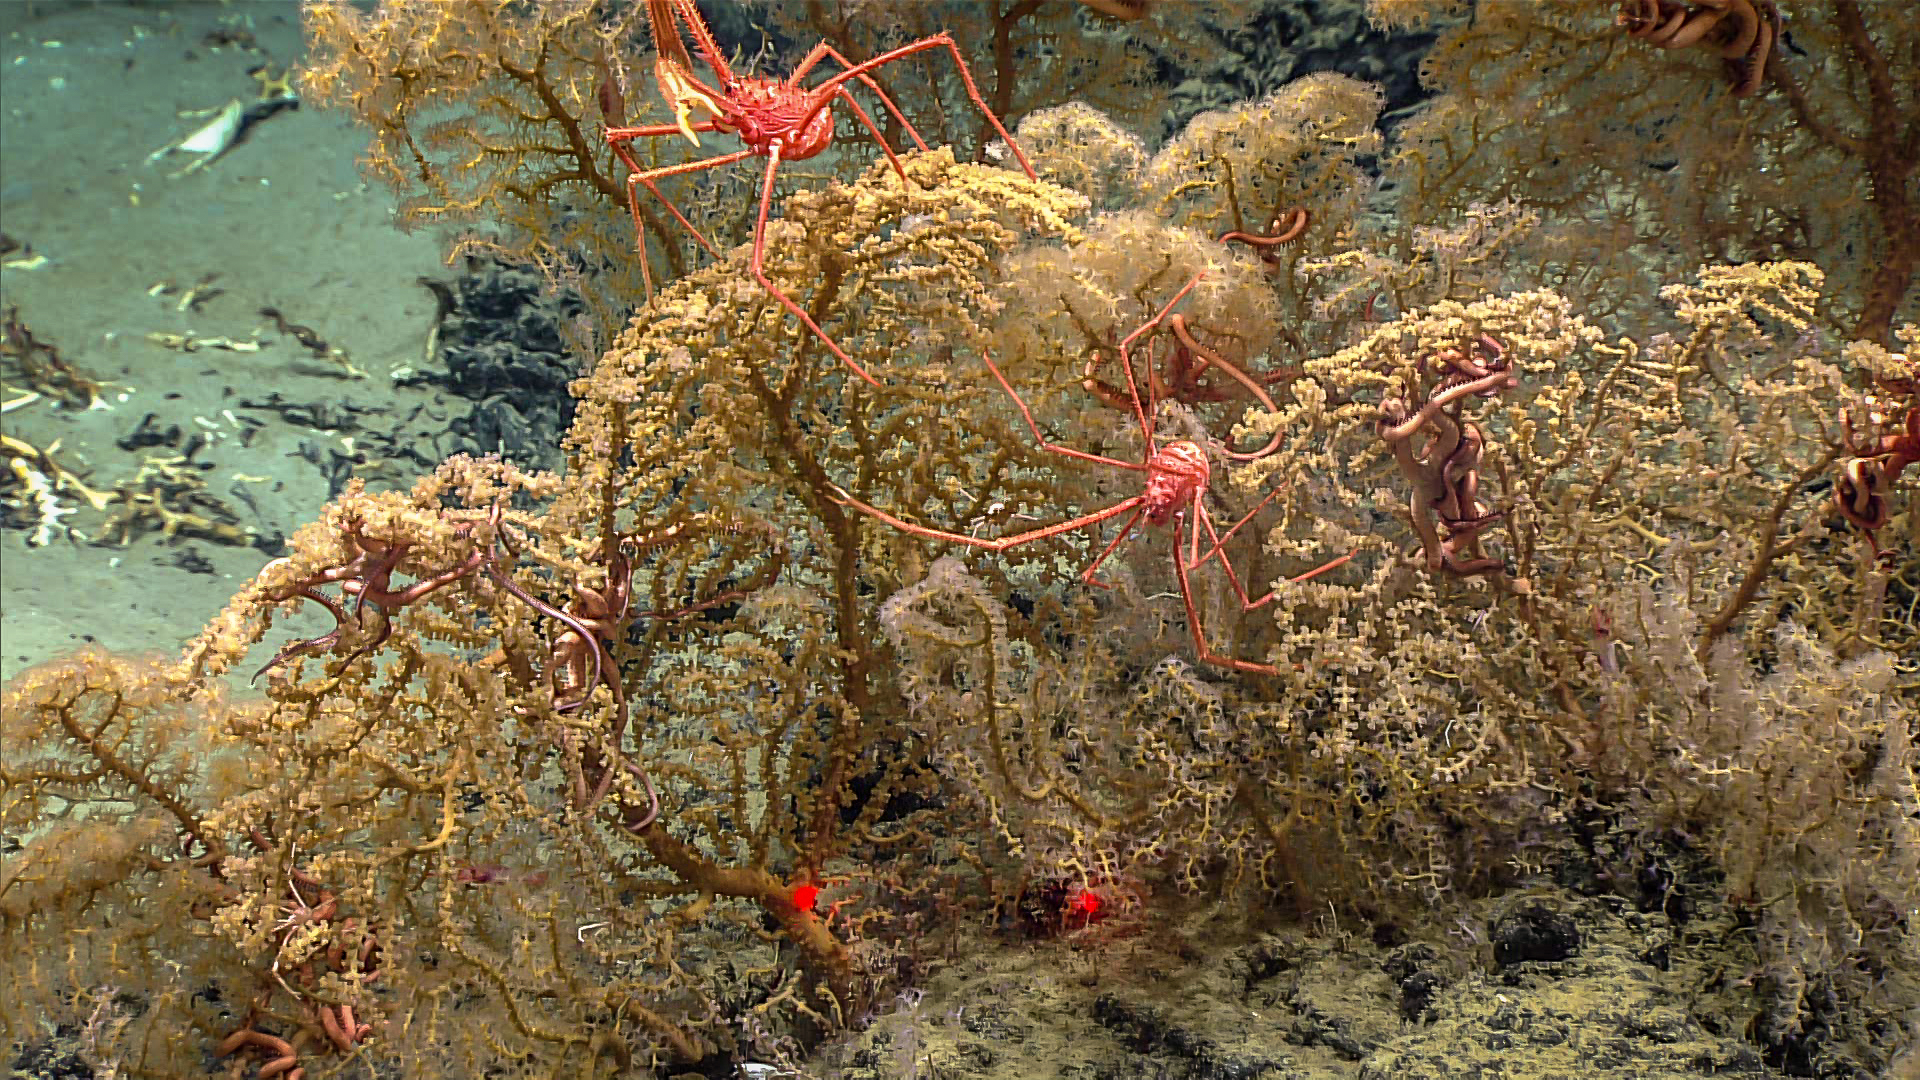 Figure 3. One of the goals of the Gulf of Mexico 2017 expedition was to search for corals in deep waters of the Gulf, as these corals provide habitat for a diversity of organisms such as squat lobsters, ophiuroids, and more. Image from dive 09 of the expedition at “Henderson Ridge Mid South”. By locating deep-sea coral communities, we are in a better position to understand and thus manage marine resources in the Gulf of Mexico. Watch the video. Image courtesy of NOAA’s Office of Ocean Exploration and Research.